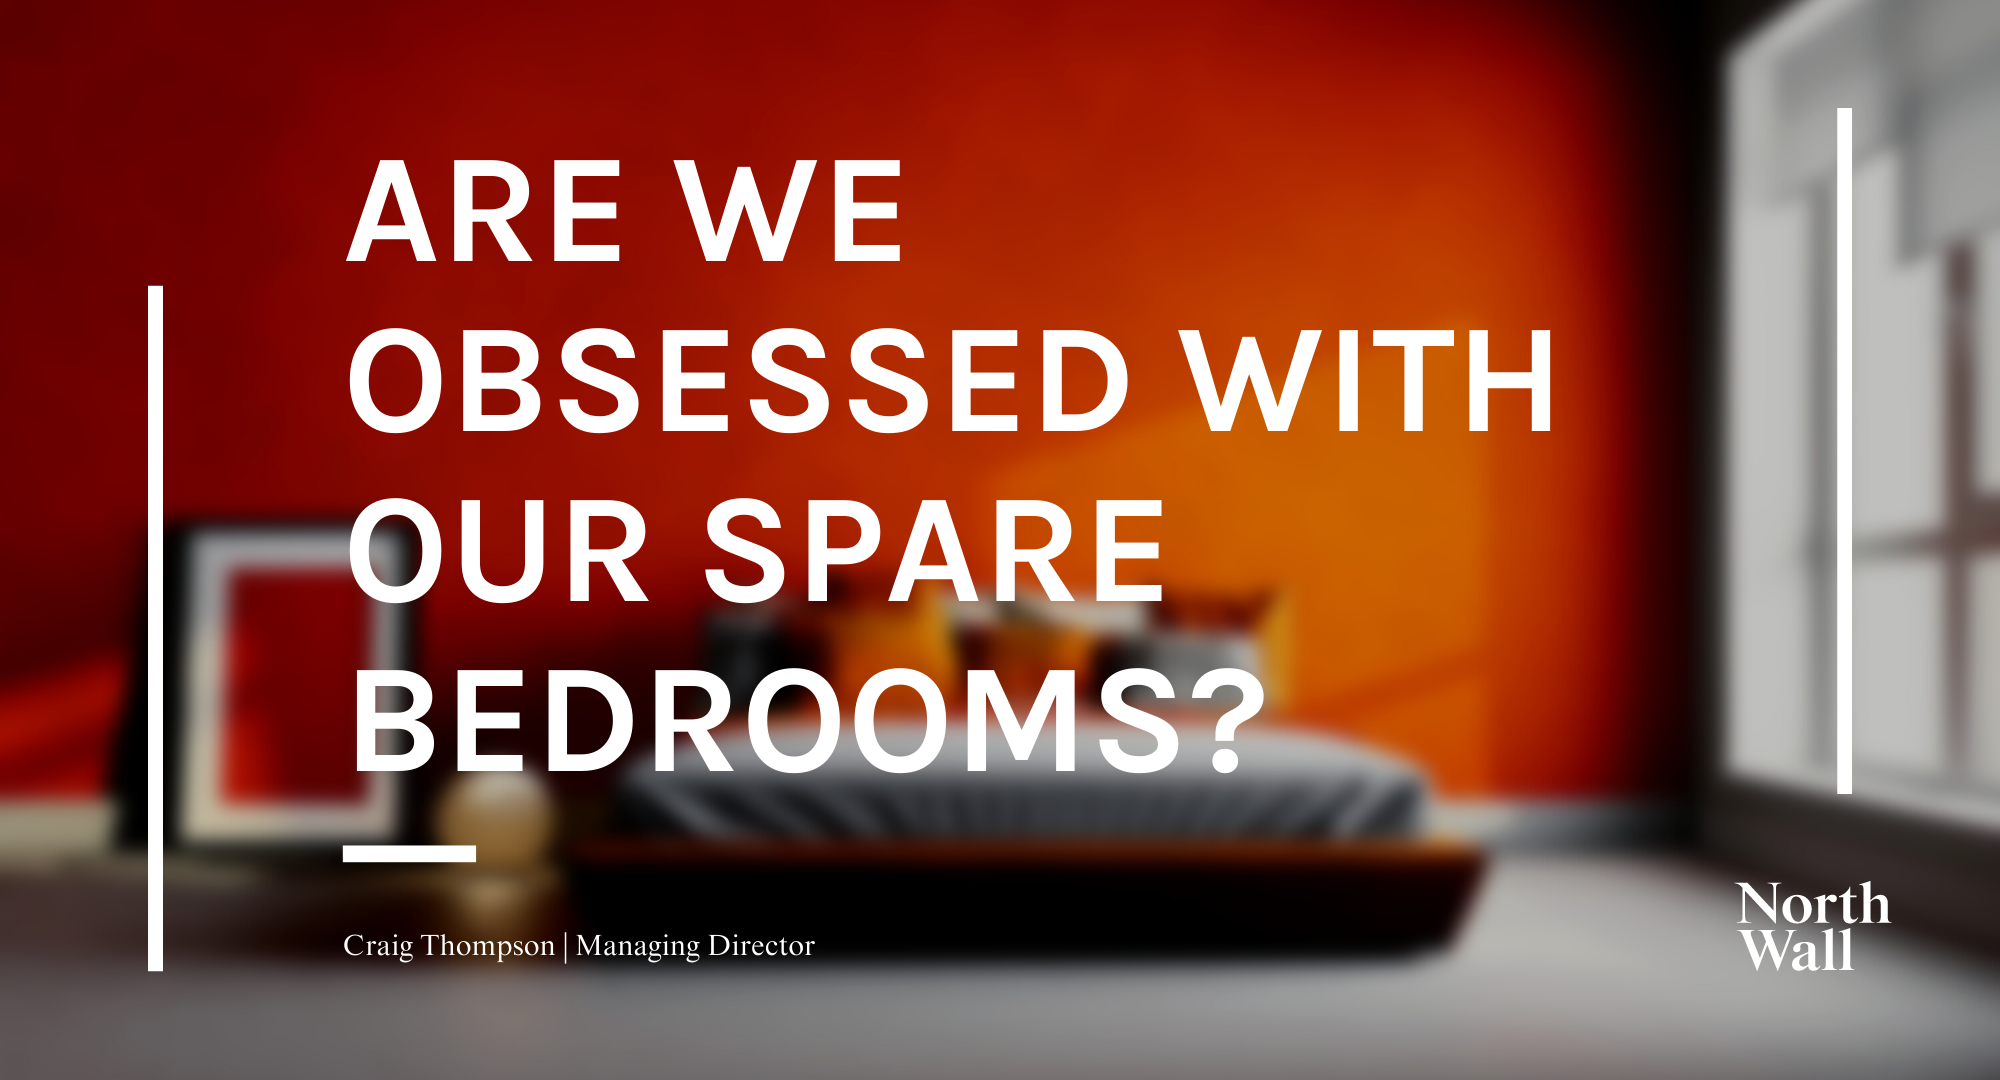 Are we obsessed with our spare bedrooms?